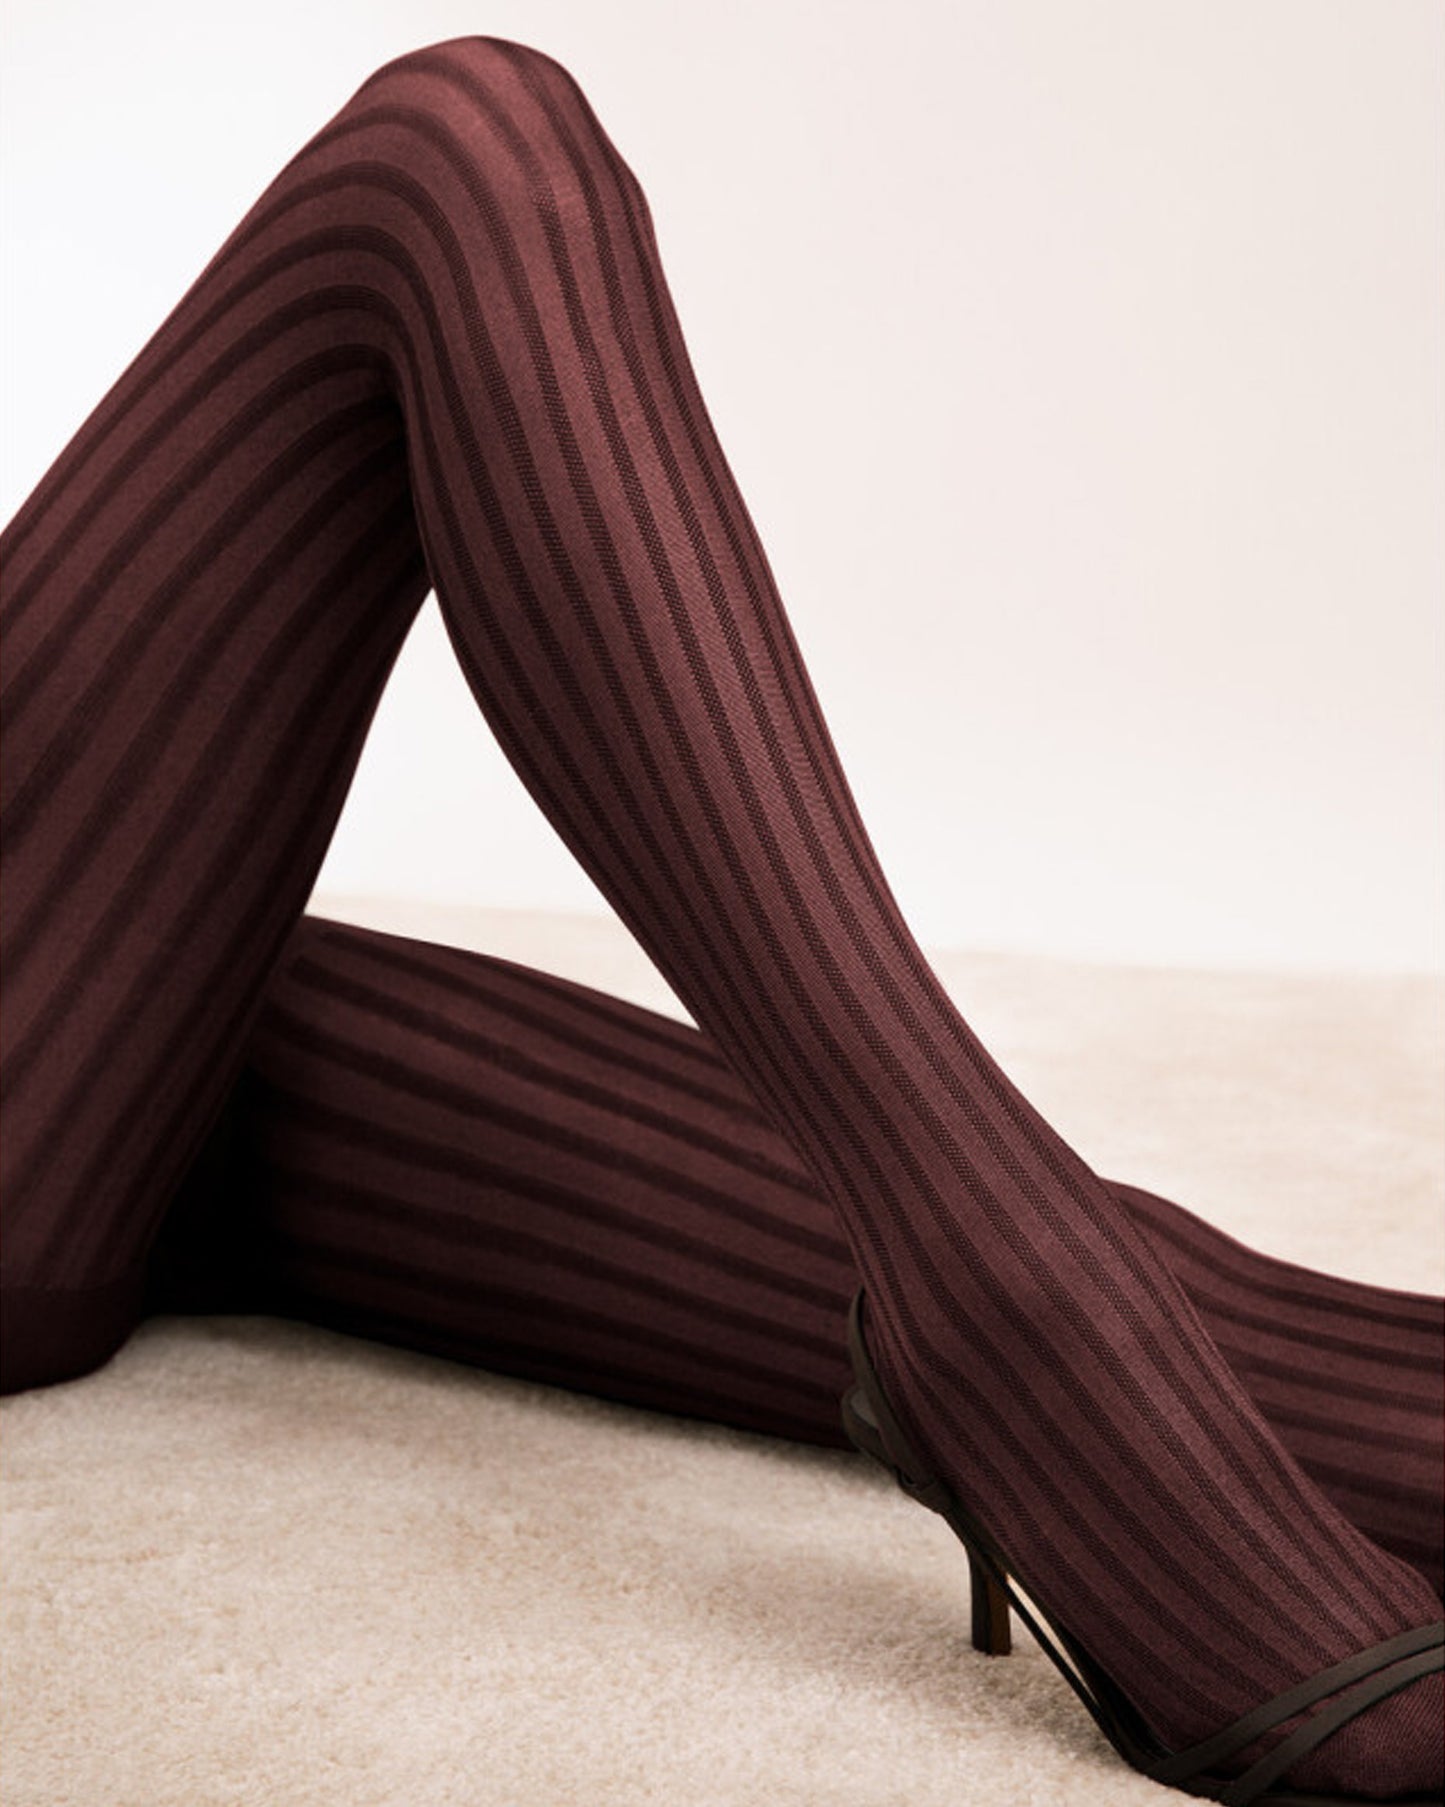 Fiore Colour Story Tights - Semi-opaque wine fashion tights with a two toned vertical stripe and gloss shine finish.